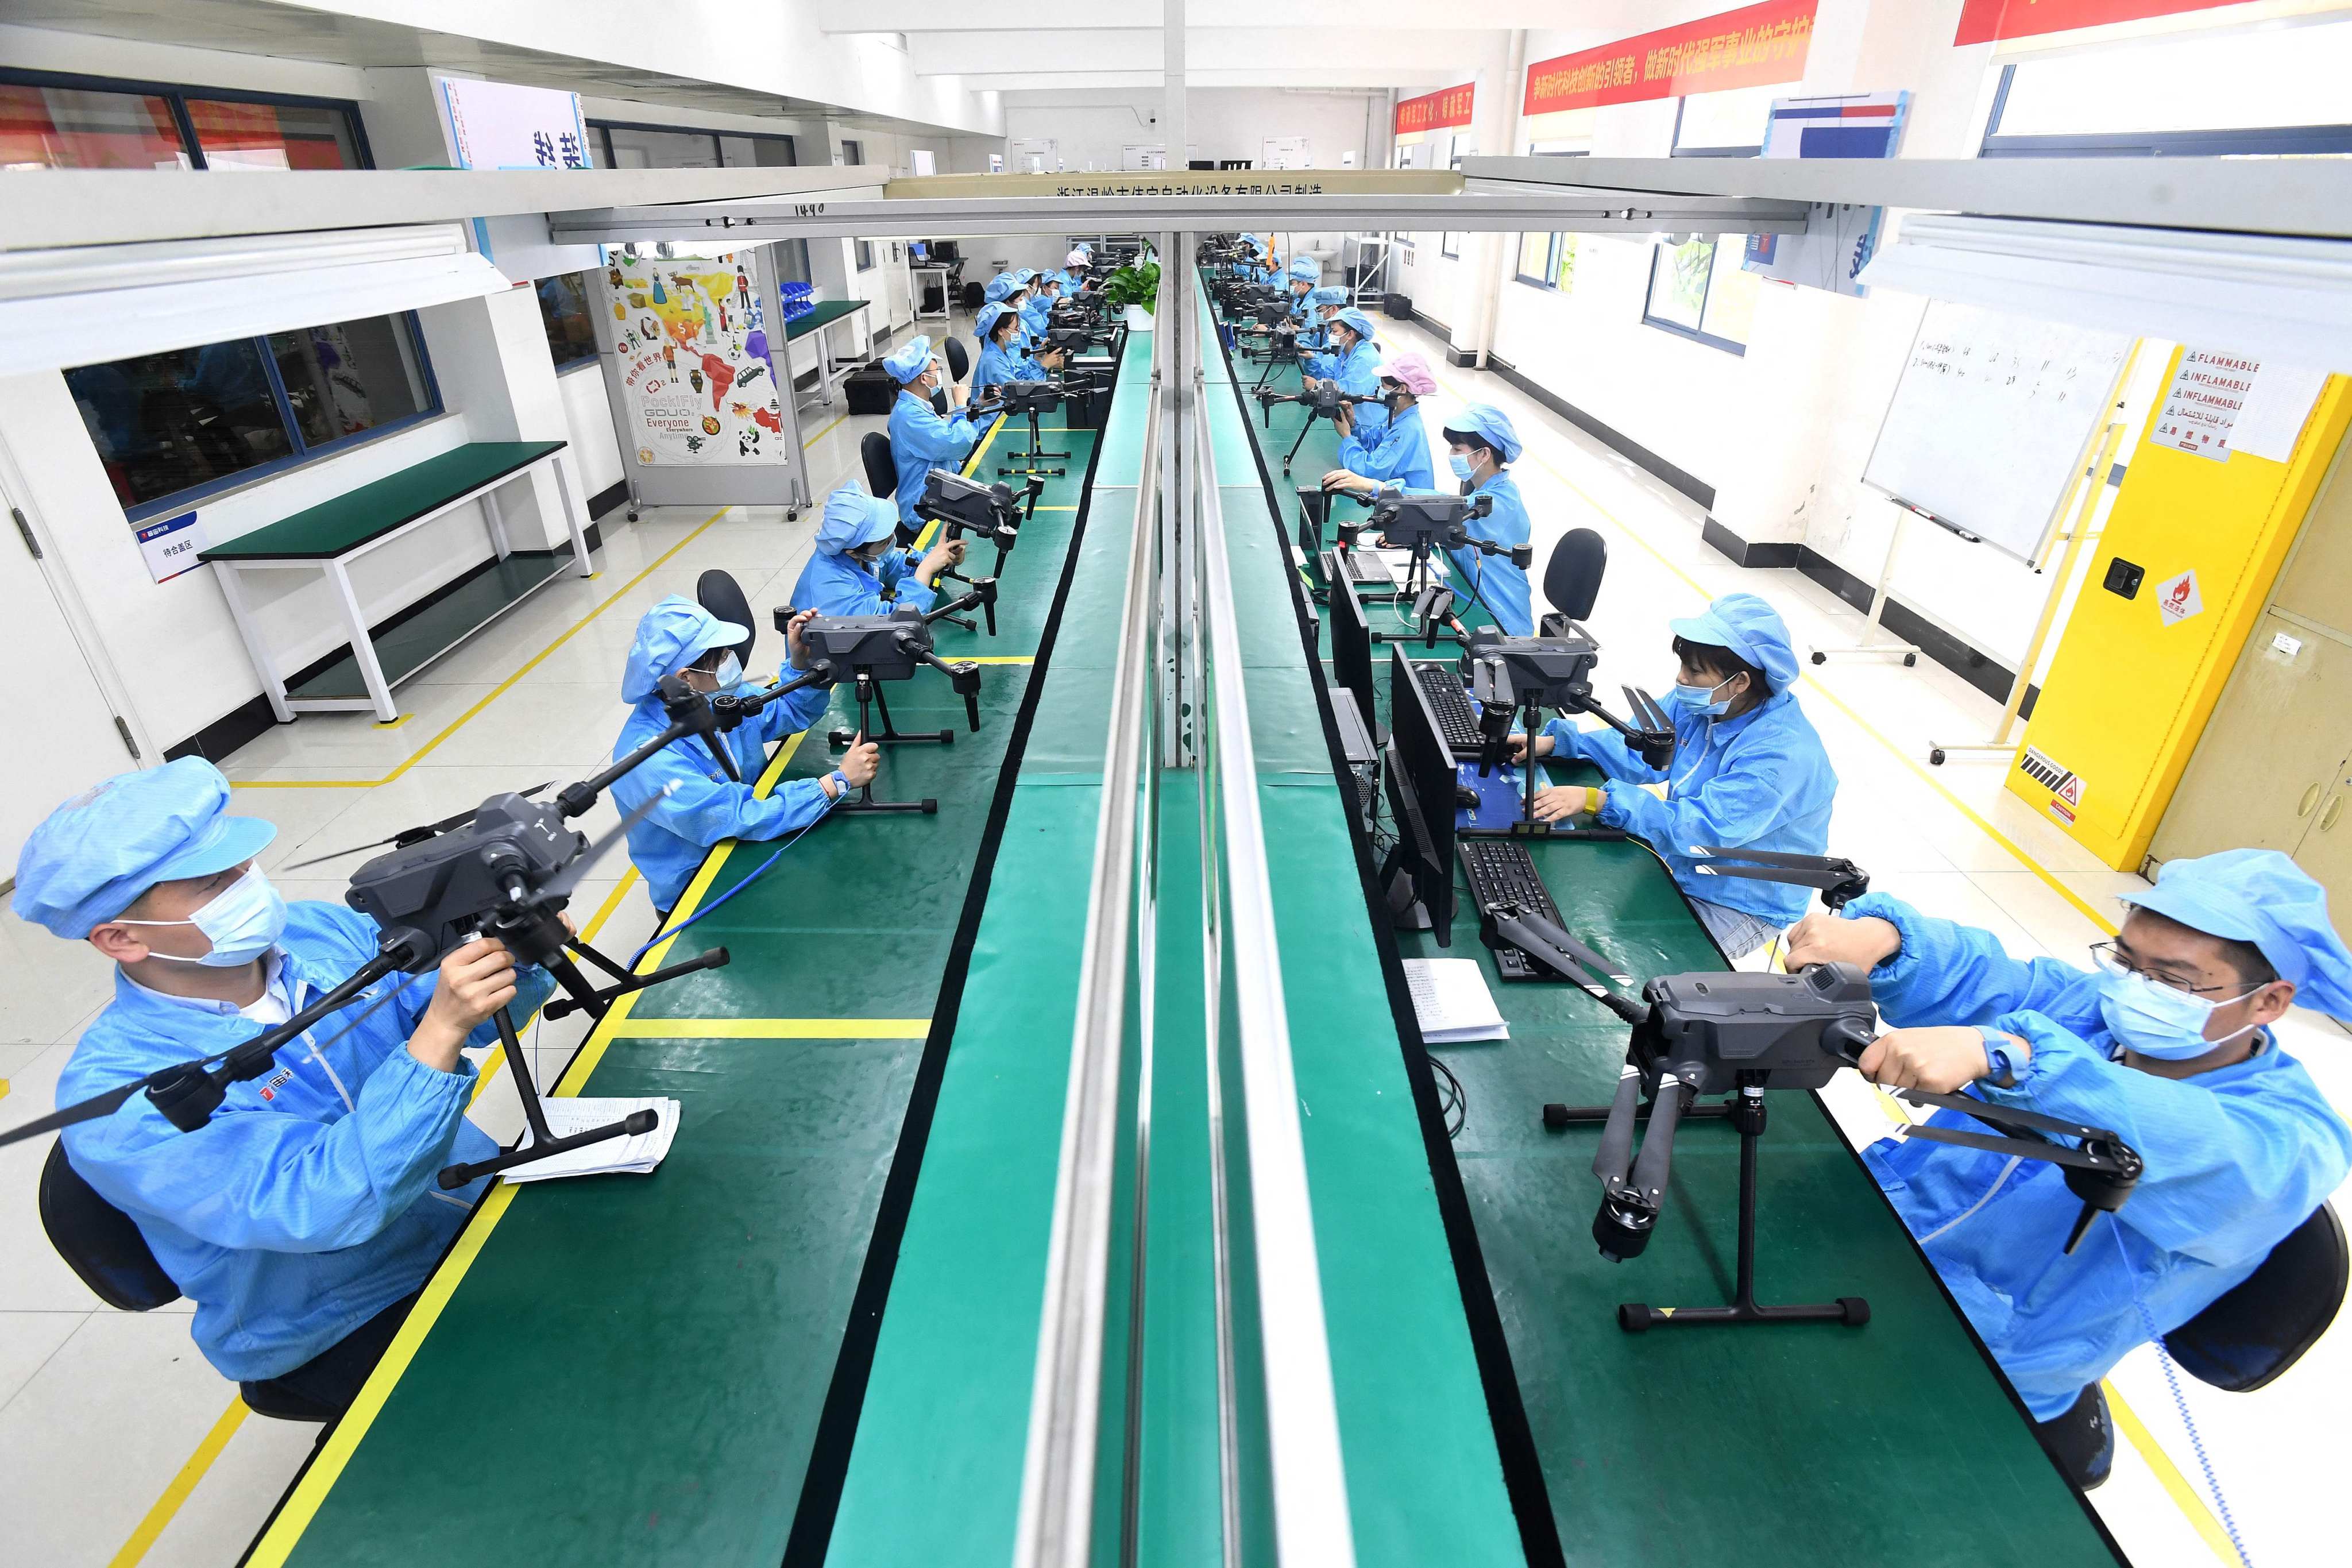 Workers produce drones at a factory in Wuhan, in central Hubei province, on April 13. After years of prioritising rapid growth above all else in national policy, China’s government is shifting its focus to jobs and macroeconomic stability. Photo: AFP